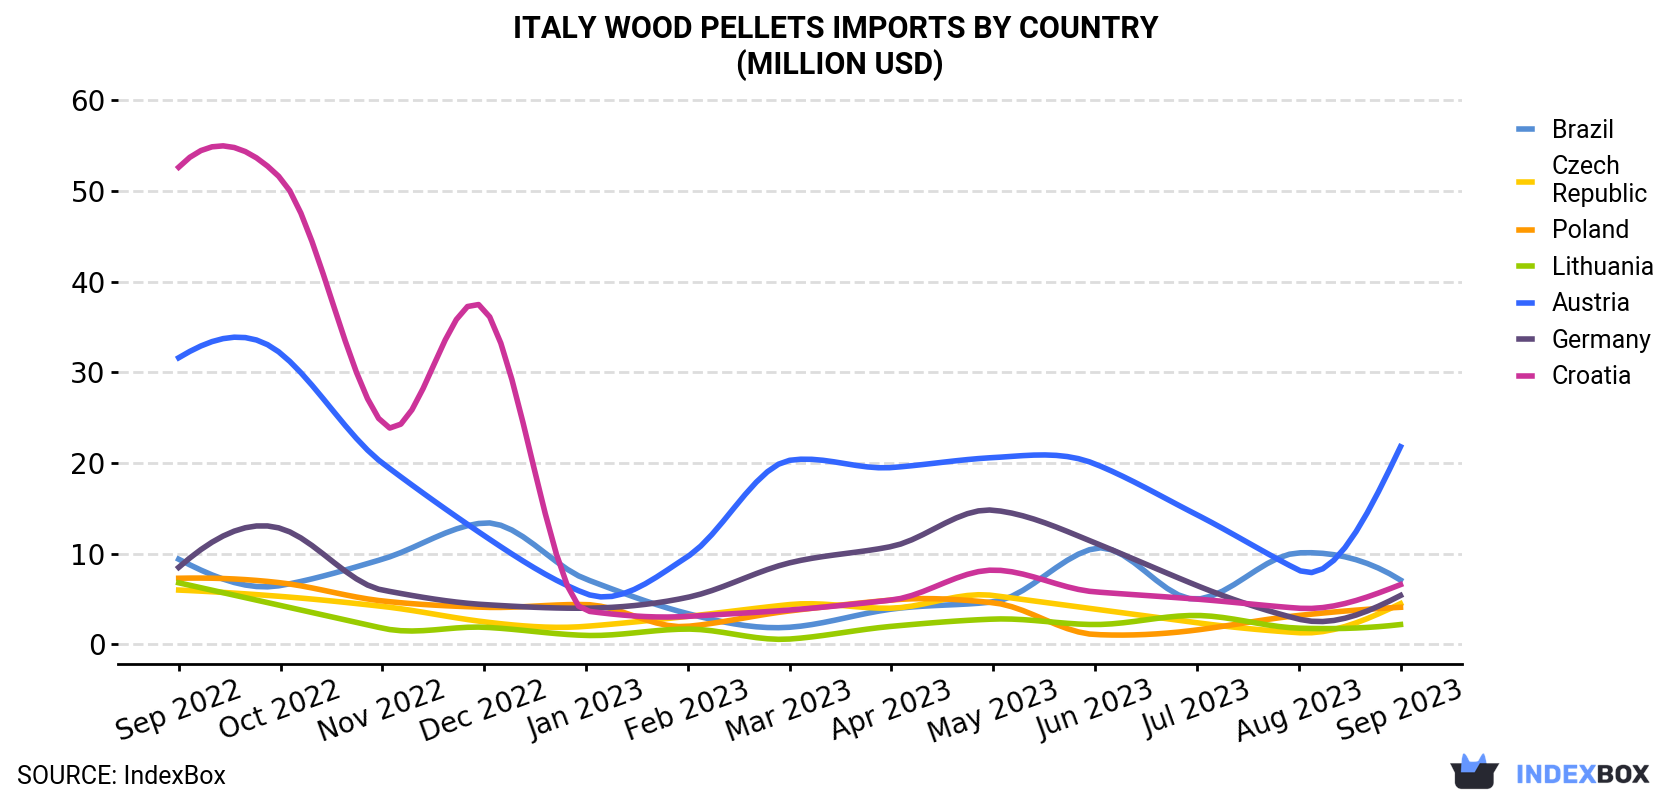 Italy Wood Pellets Imports By Country (Million USD)